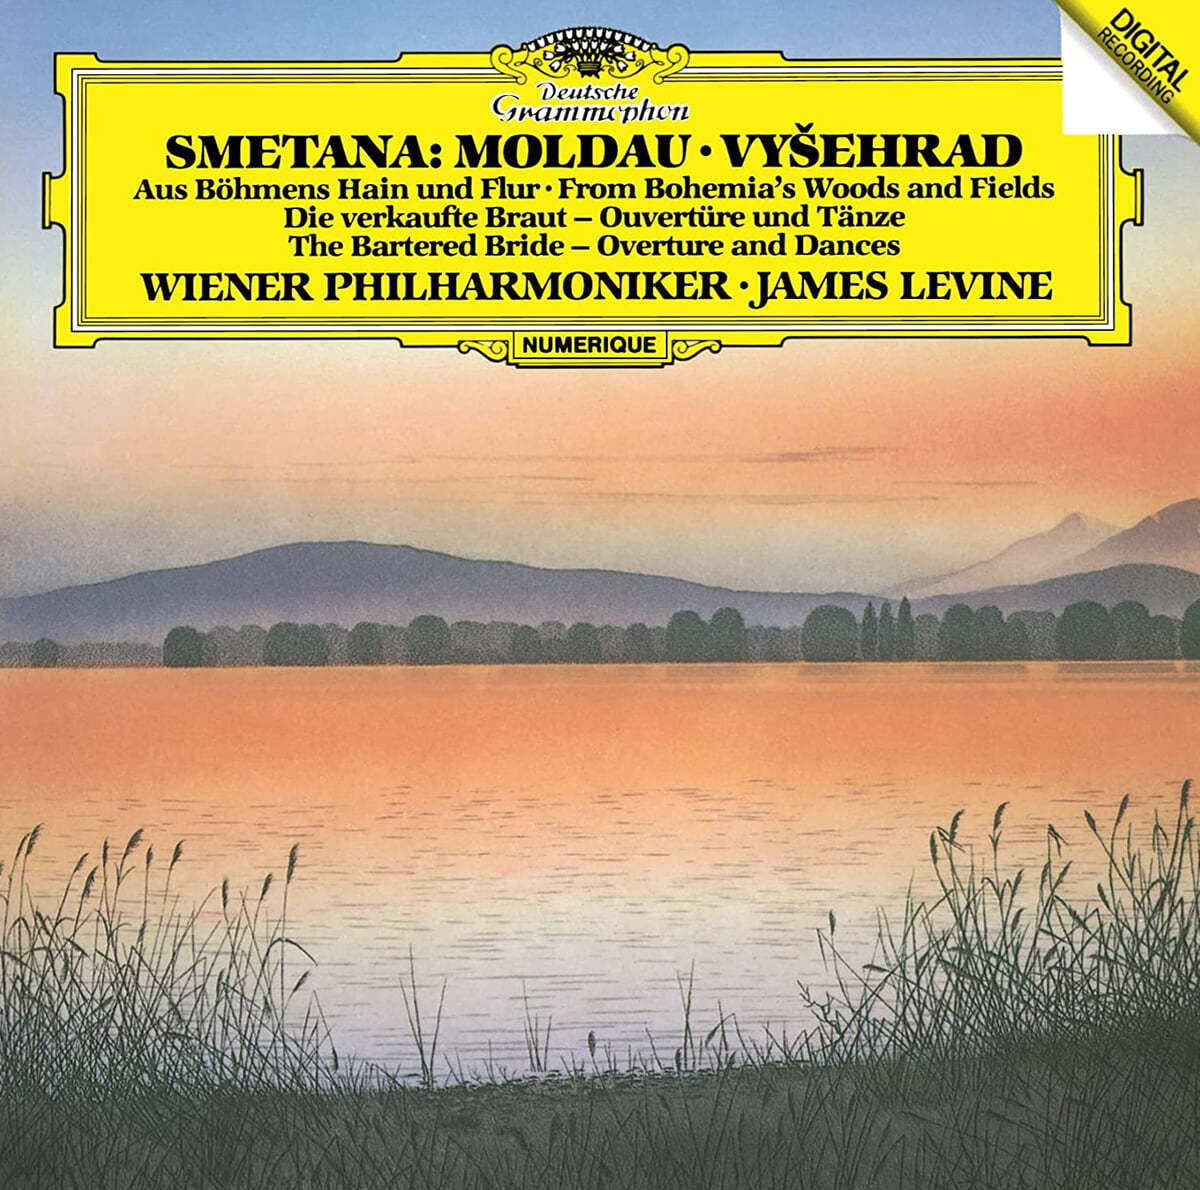 James Levine 스메타나: 교향시 모음집 (Smetana: Symphonic Poems "The High Castle", "Moldau", "From Bohemia's Pastures and Woods", from the opera "The Sold Bride")